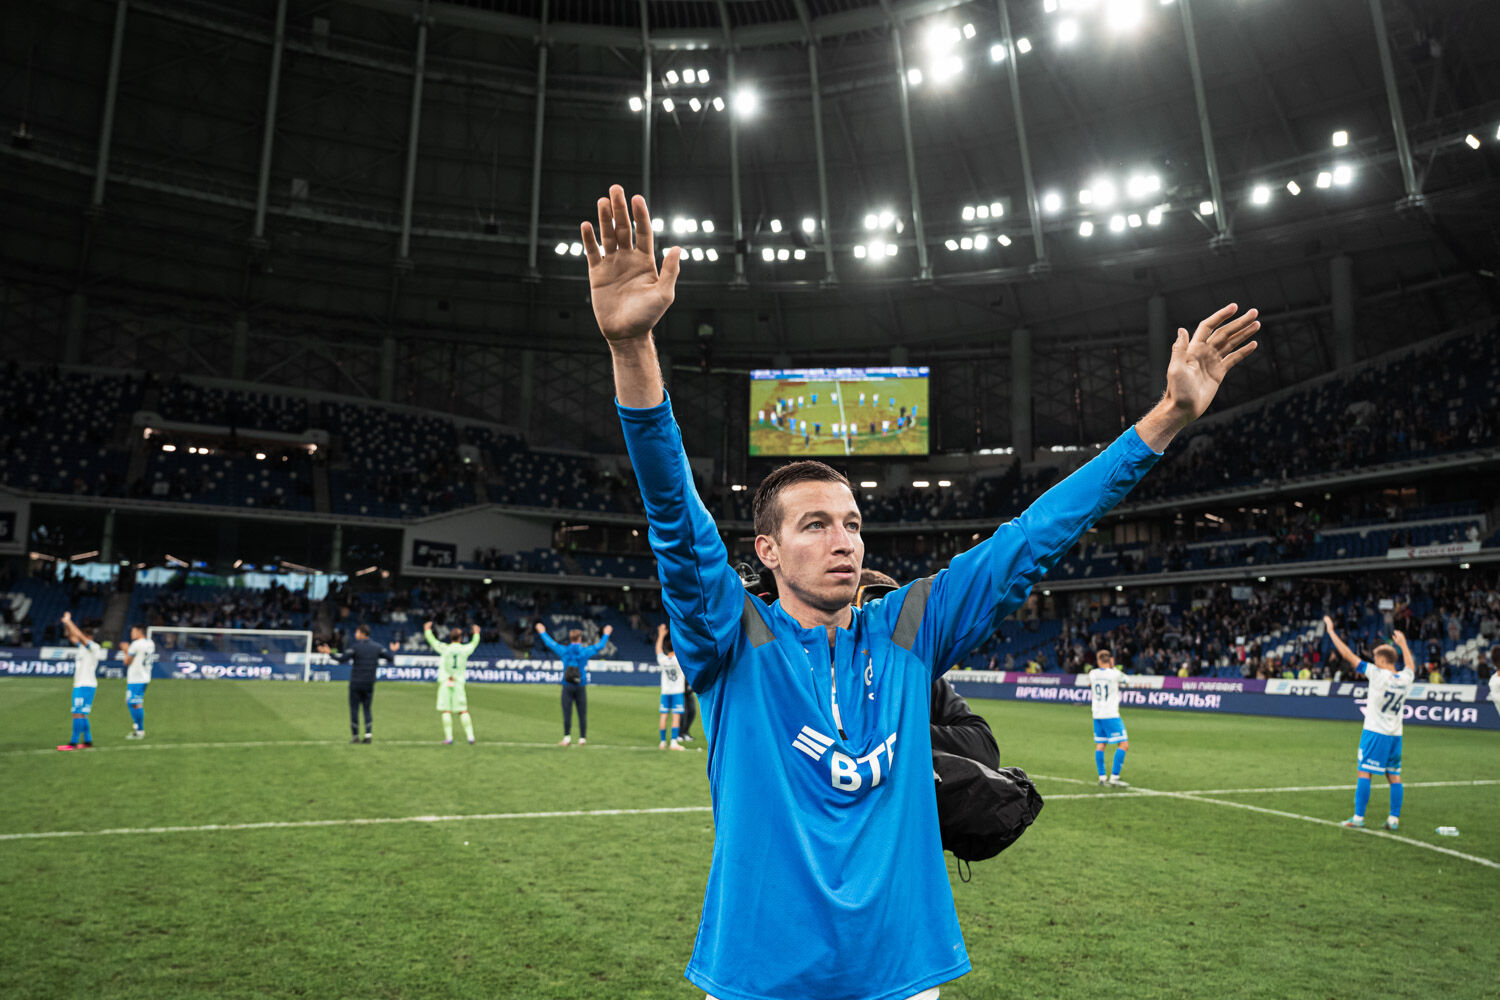 Photo gallery from home game against Ural